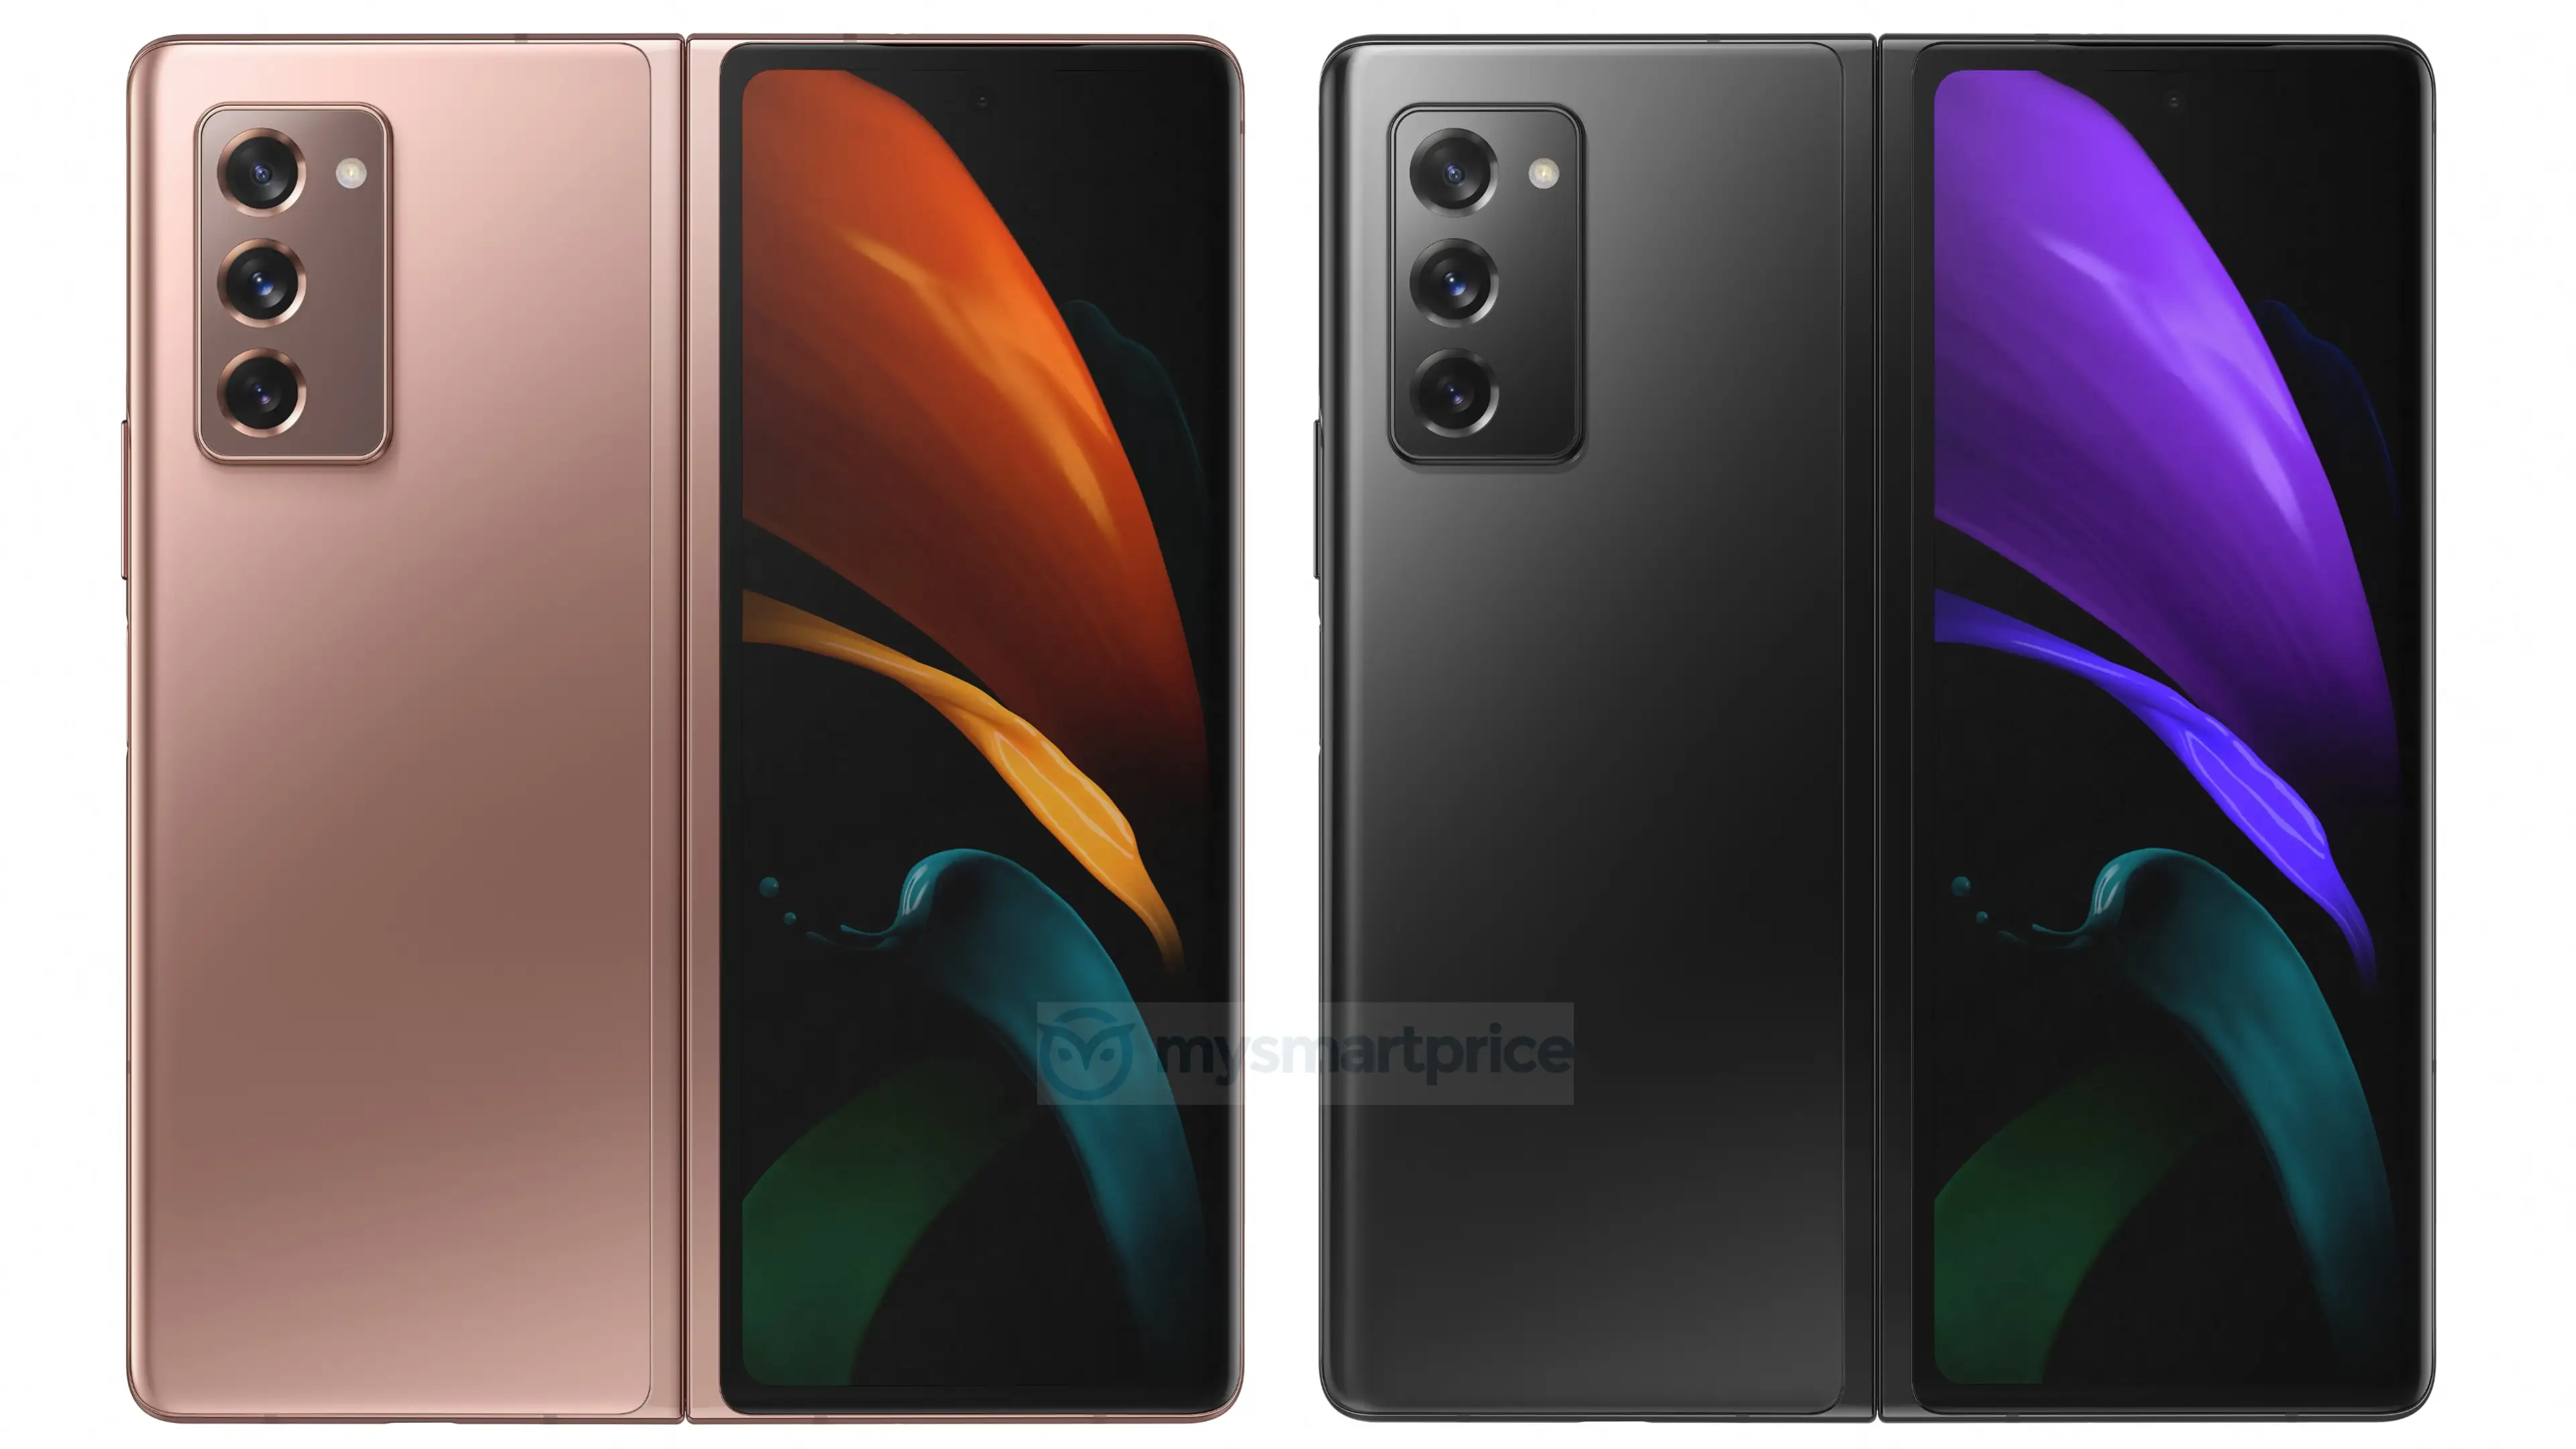 Official Samsung Galaxy Z Fold 2 renders leak, confirms